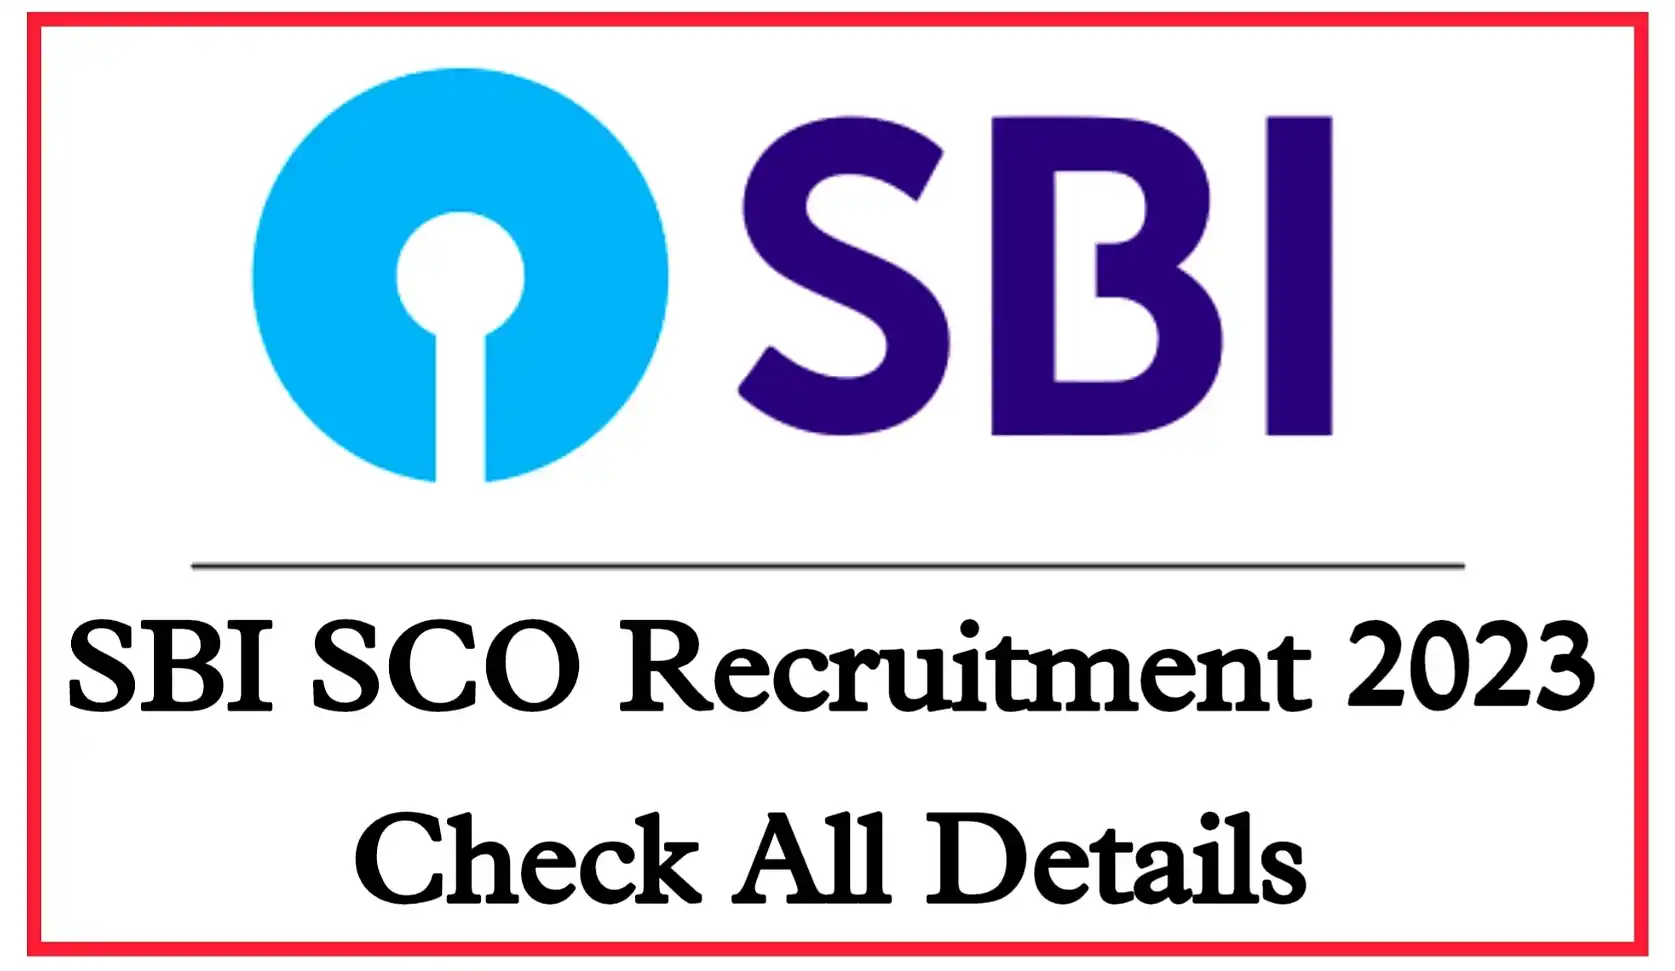 SBI SCO Recruitment 2023 Notification, Apply Online For 217 Posts, Exam Date, Syllabus Check All Details